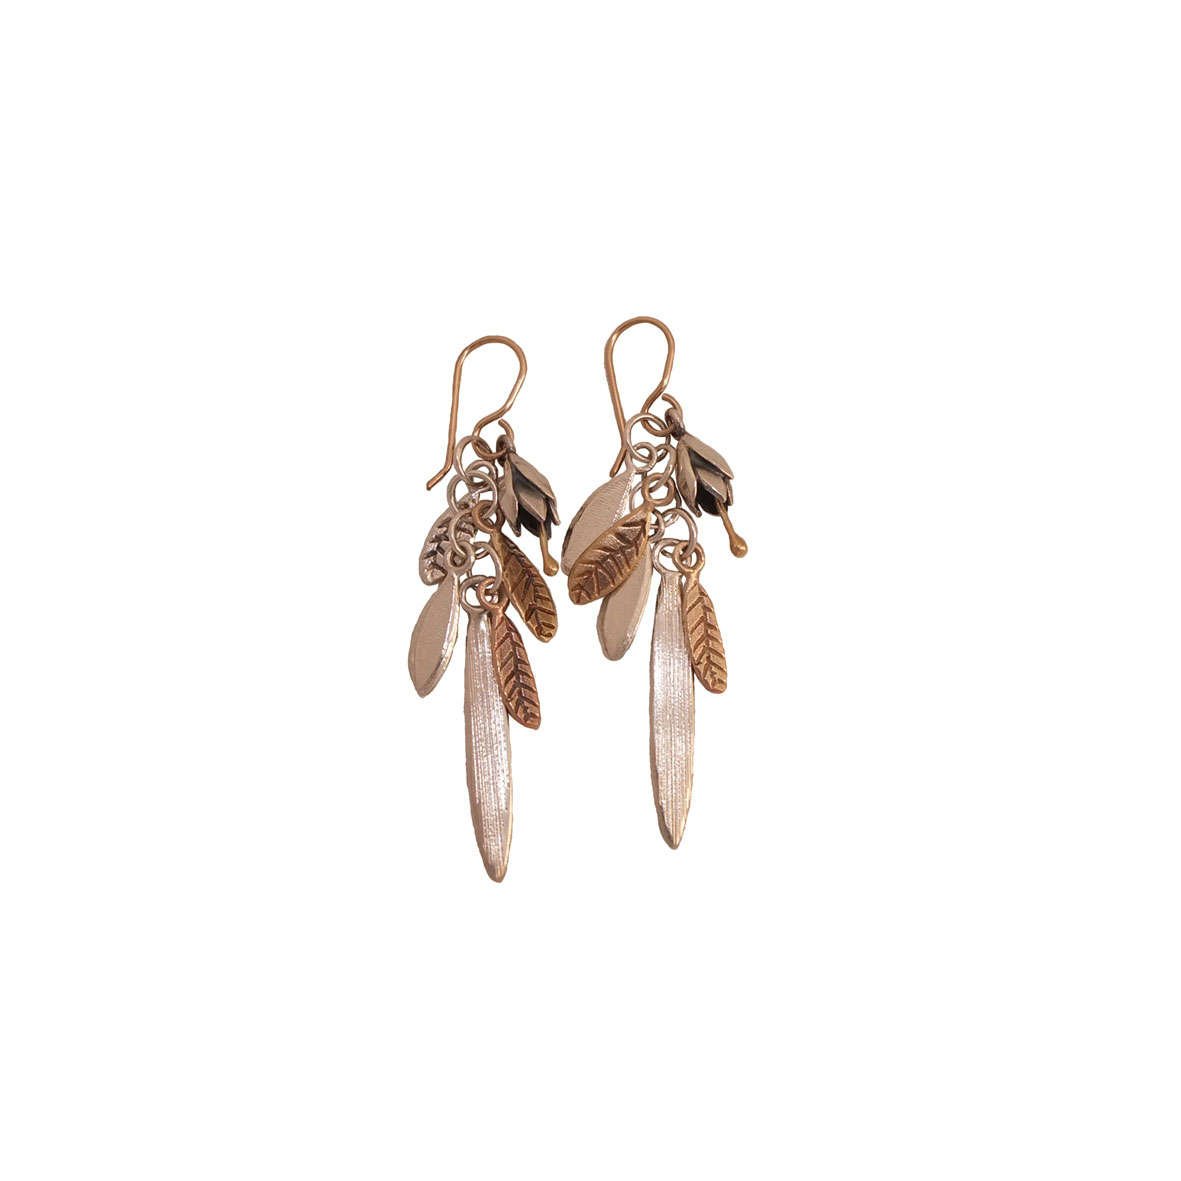 Jewellery | Earrings | Silver and Gold Flowers